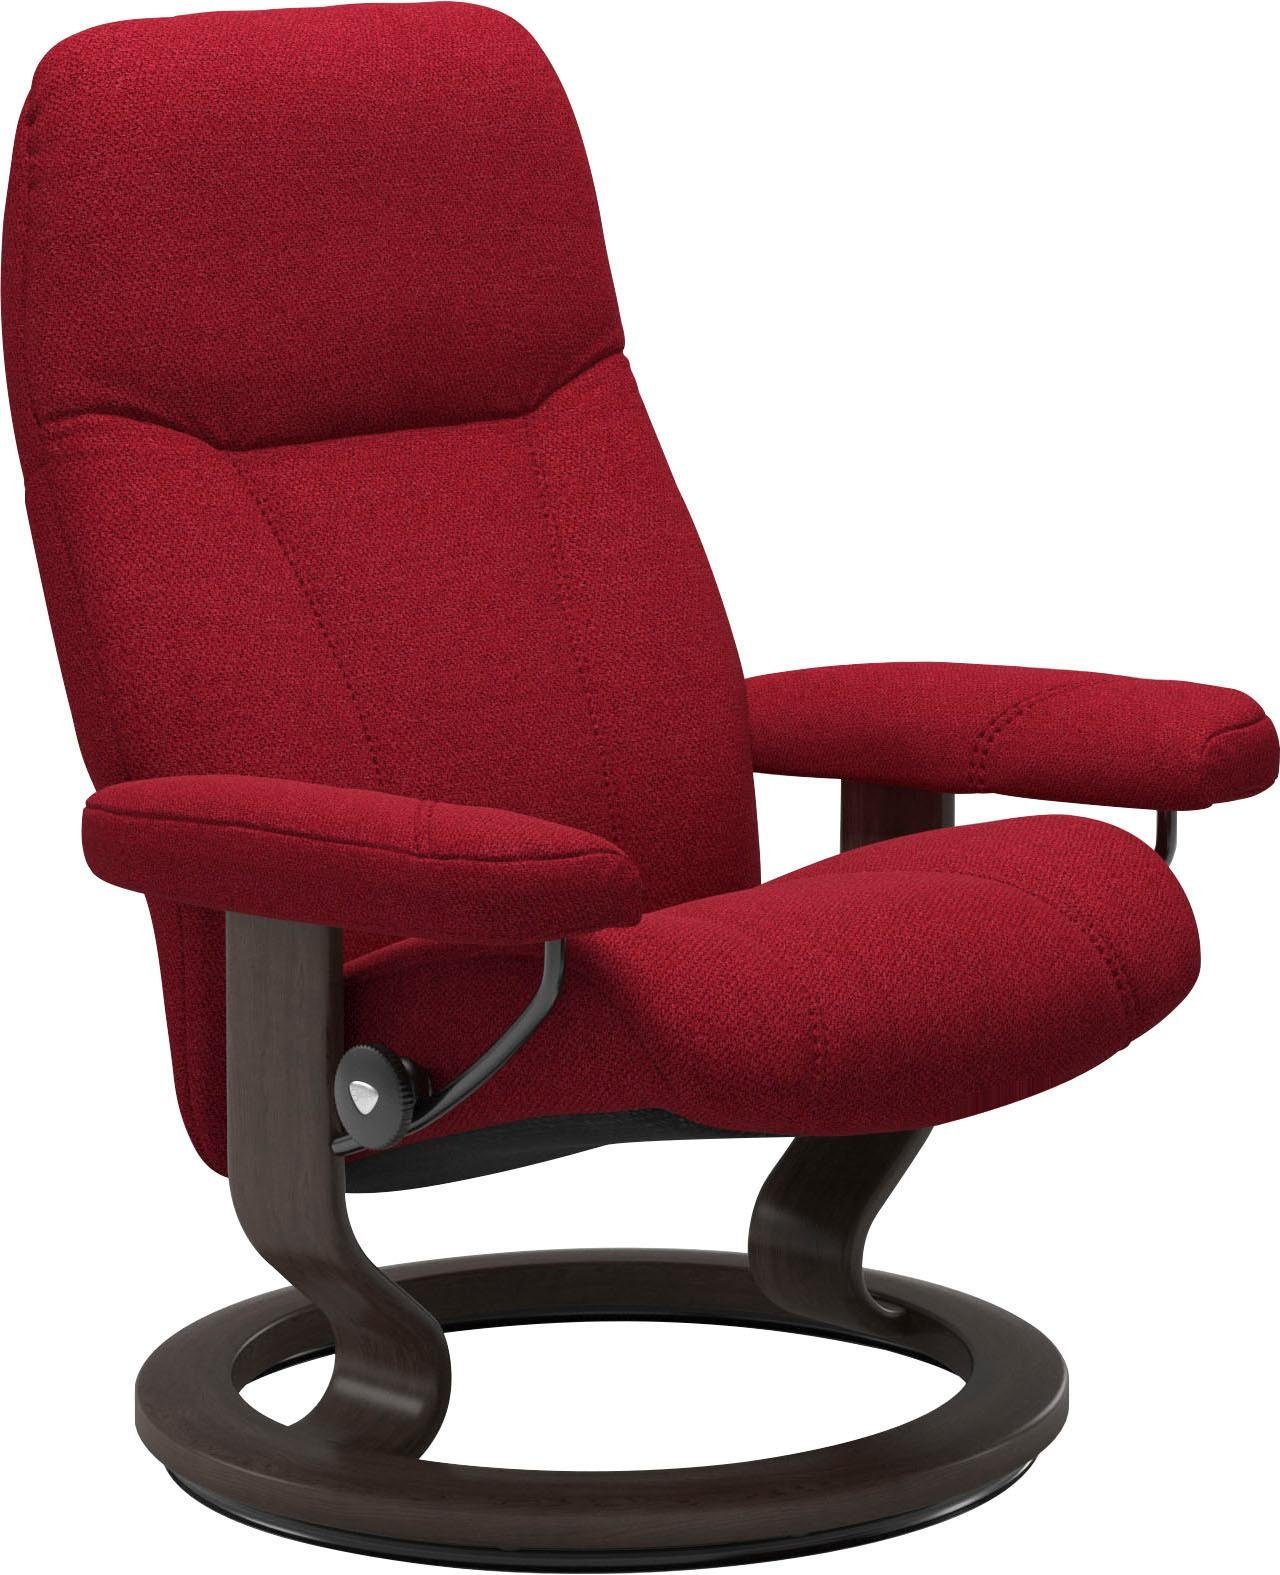 Größe Base, mit Consul, Gestell Relaxsessel Stressless® Classic L, Wenge